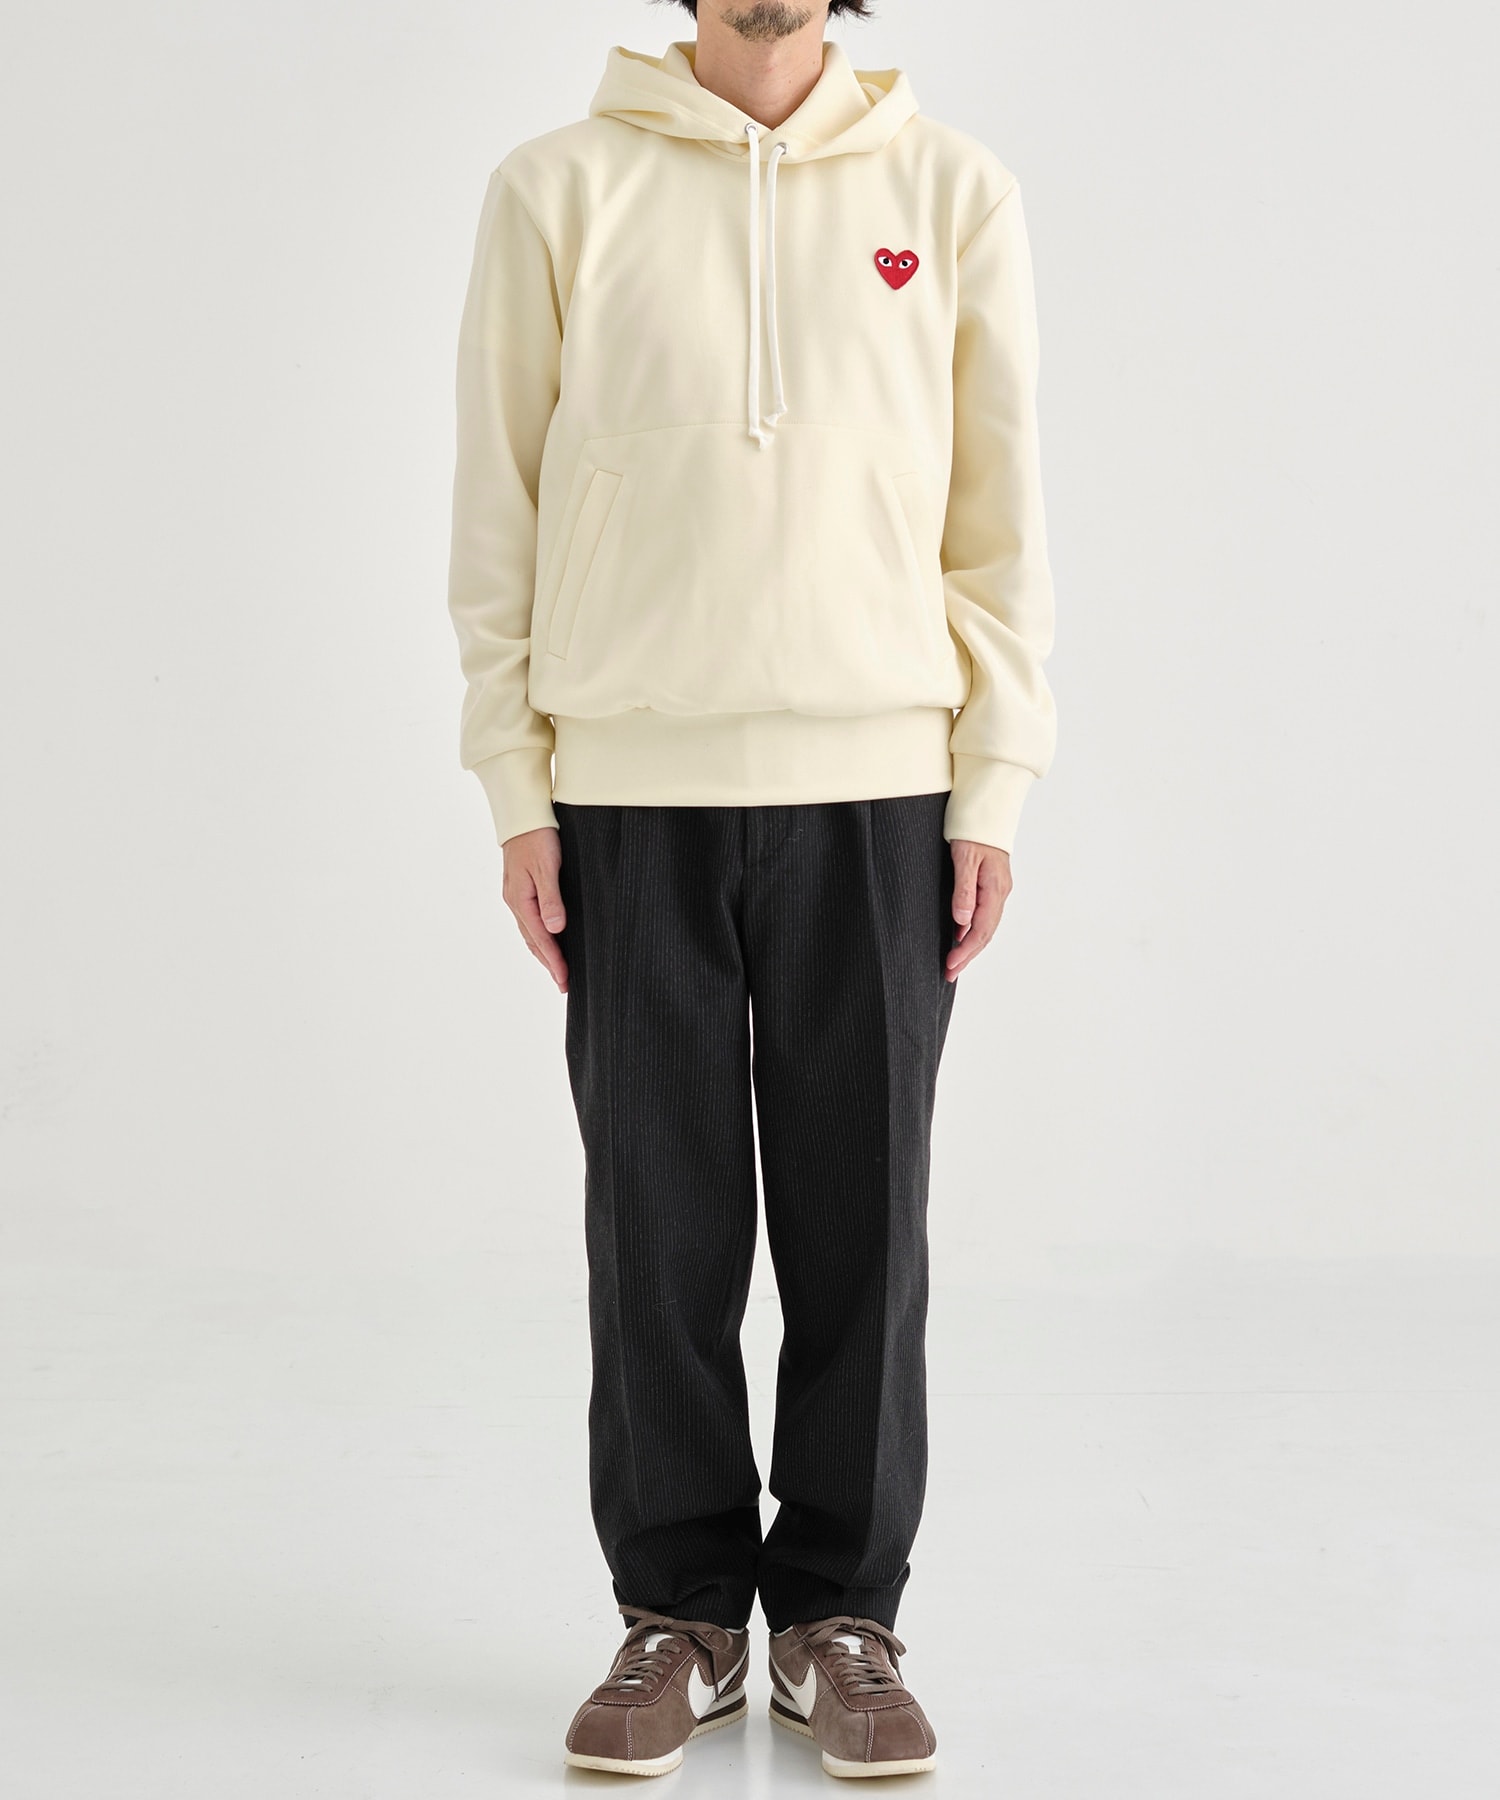 AZ-T174-051 PLAY HOODED SWEATSHIRT RED HEART PLAY COMME des GARCONS